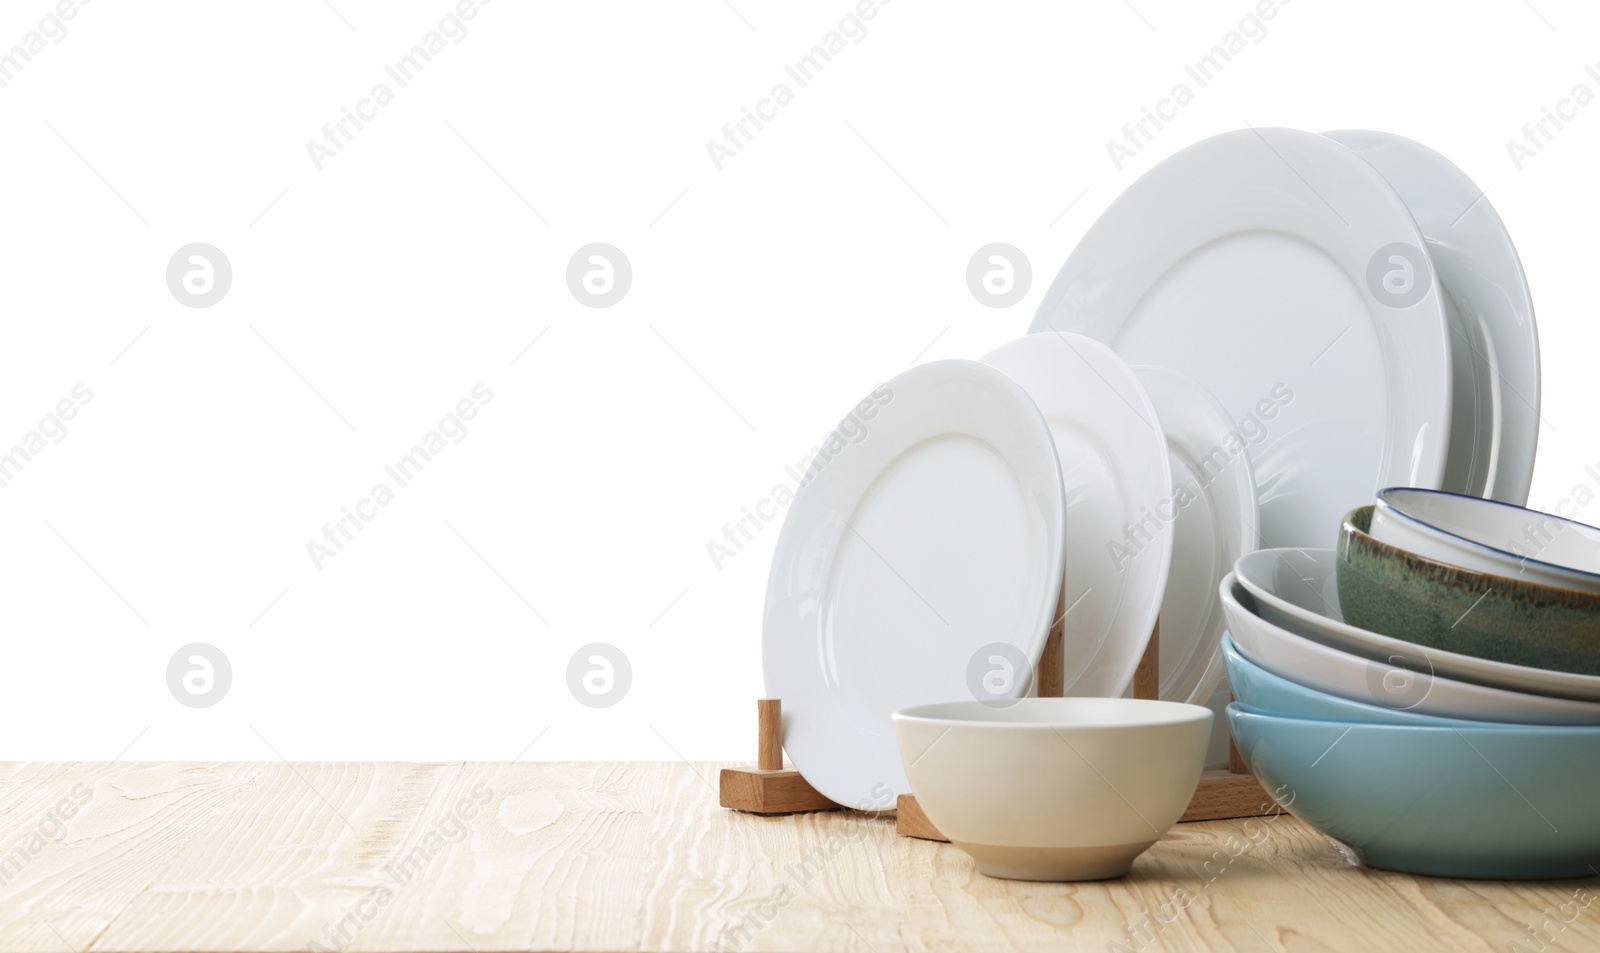 Photo of Set of clean color bowls and plates on wooden table against white background